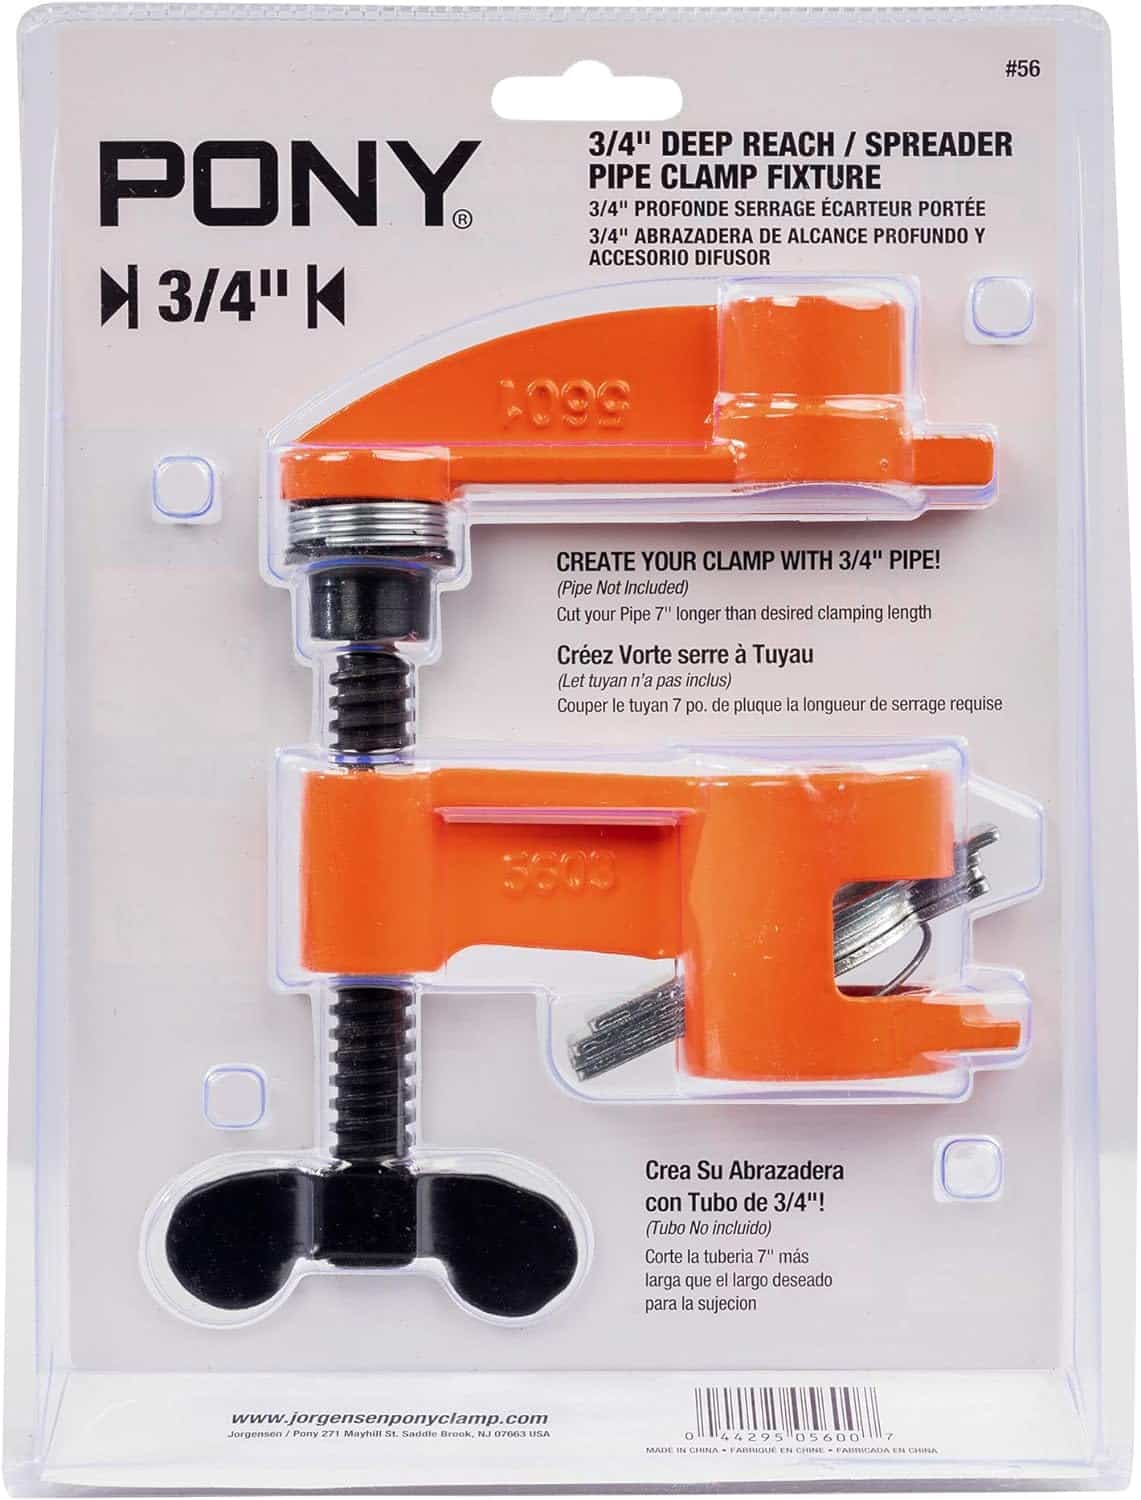 Pony 56 2-1/2" Deep Reach Clamp & Spreader Fixture for 3/4" Pipe 6007